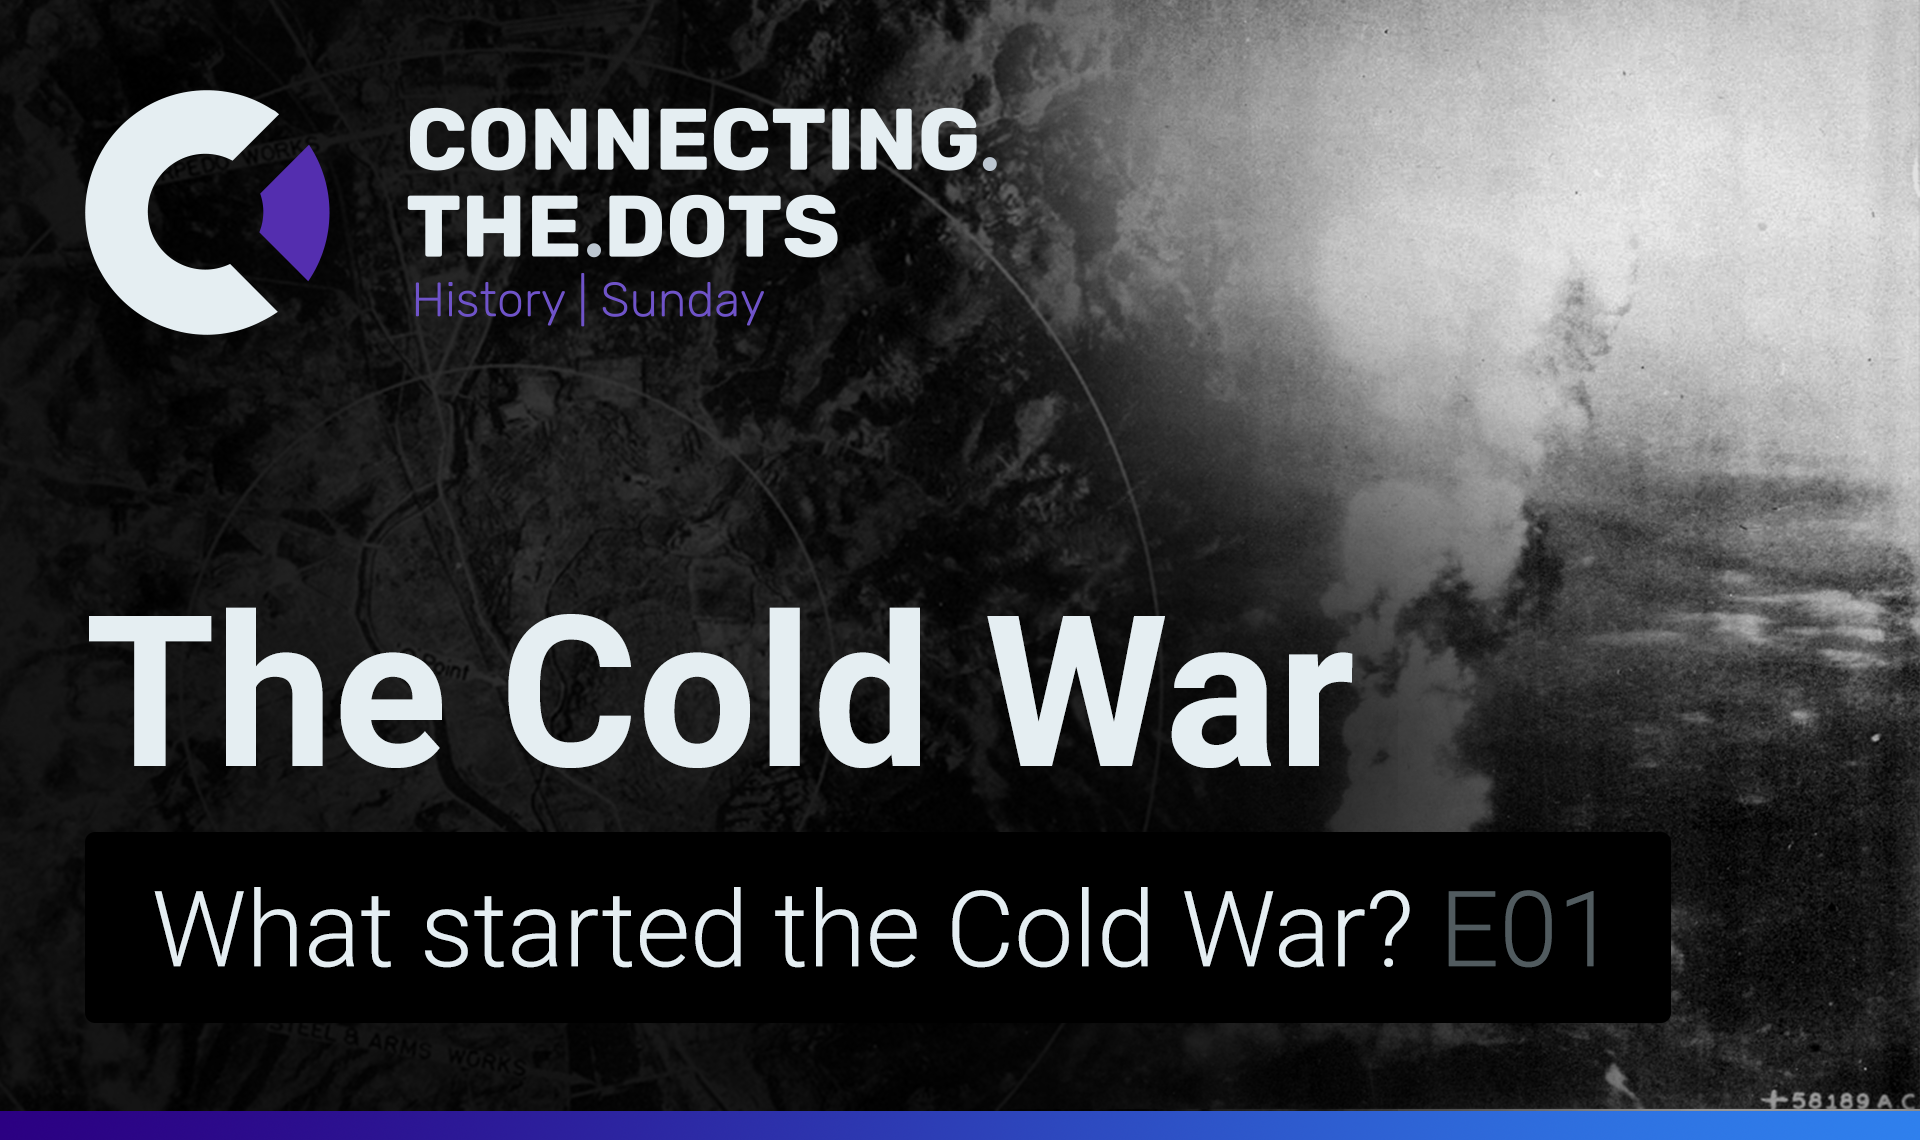 The Cold War E01 - What started the Cold War?